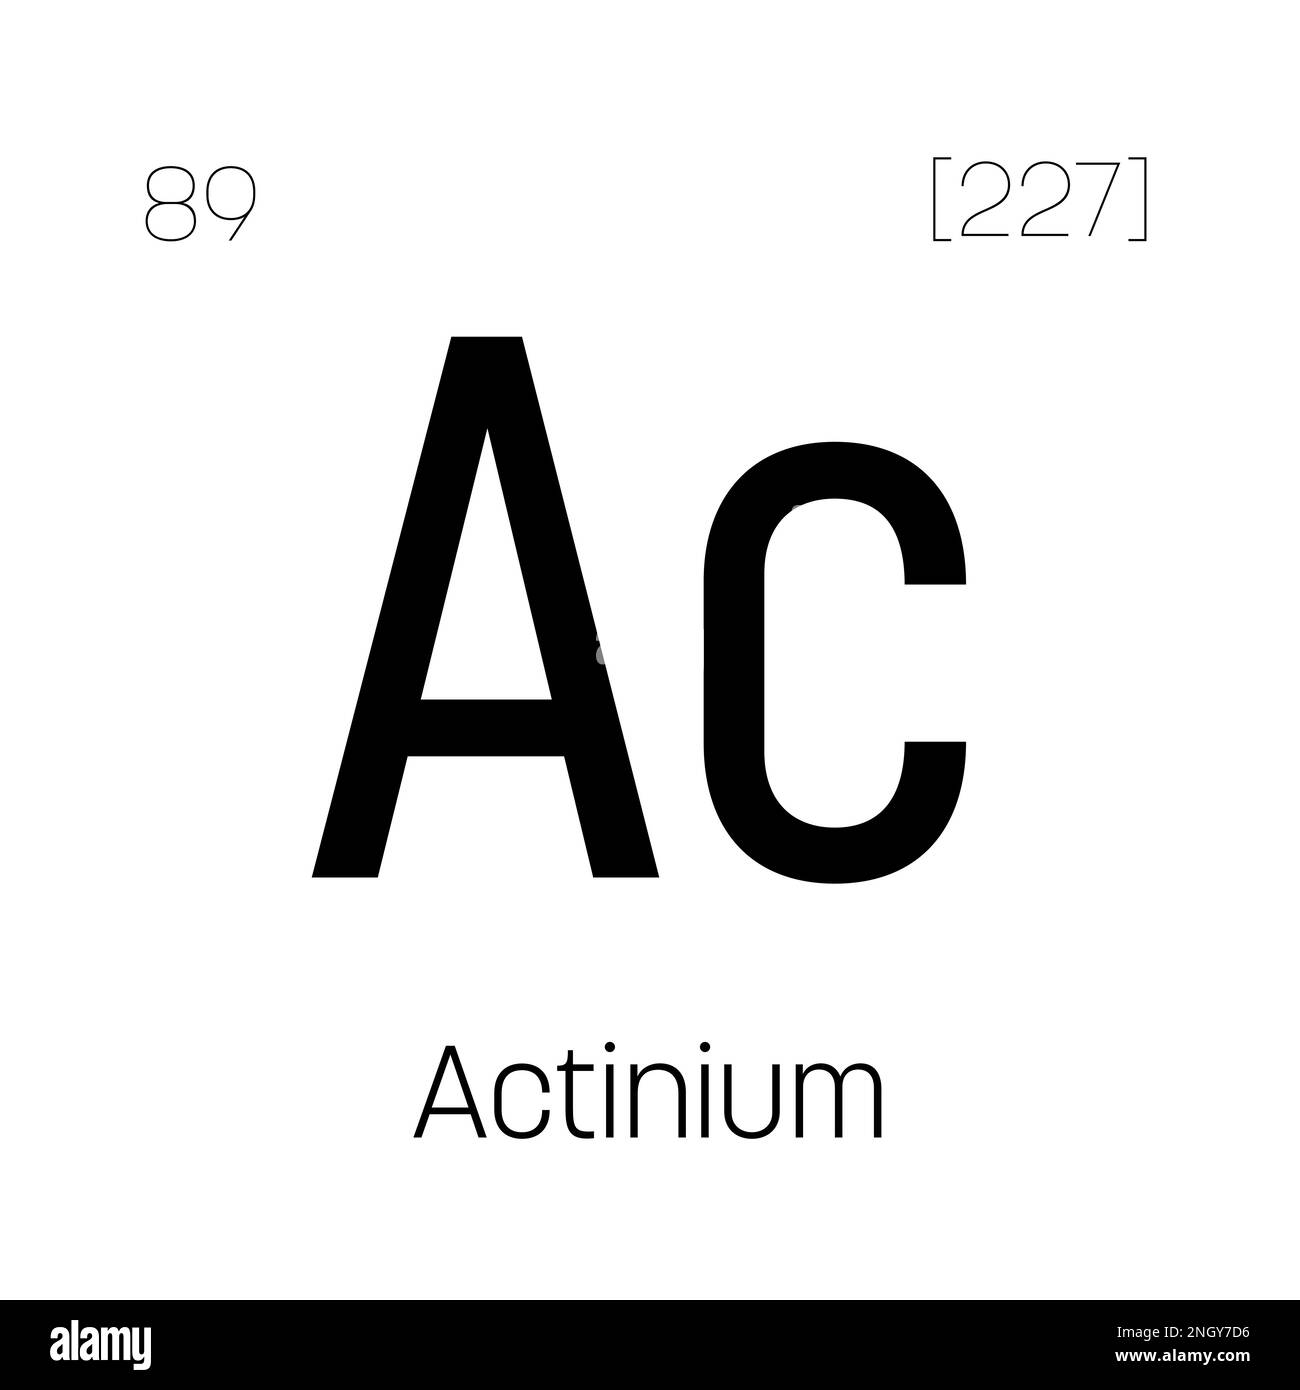 Actinium, Ac, periodic table element with name, symbol, atomic number and weight. Radioactive element with potential uses in cancer treatment and as a neutron source for scientific research. Stock Vector